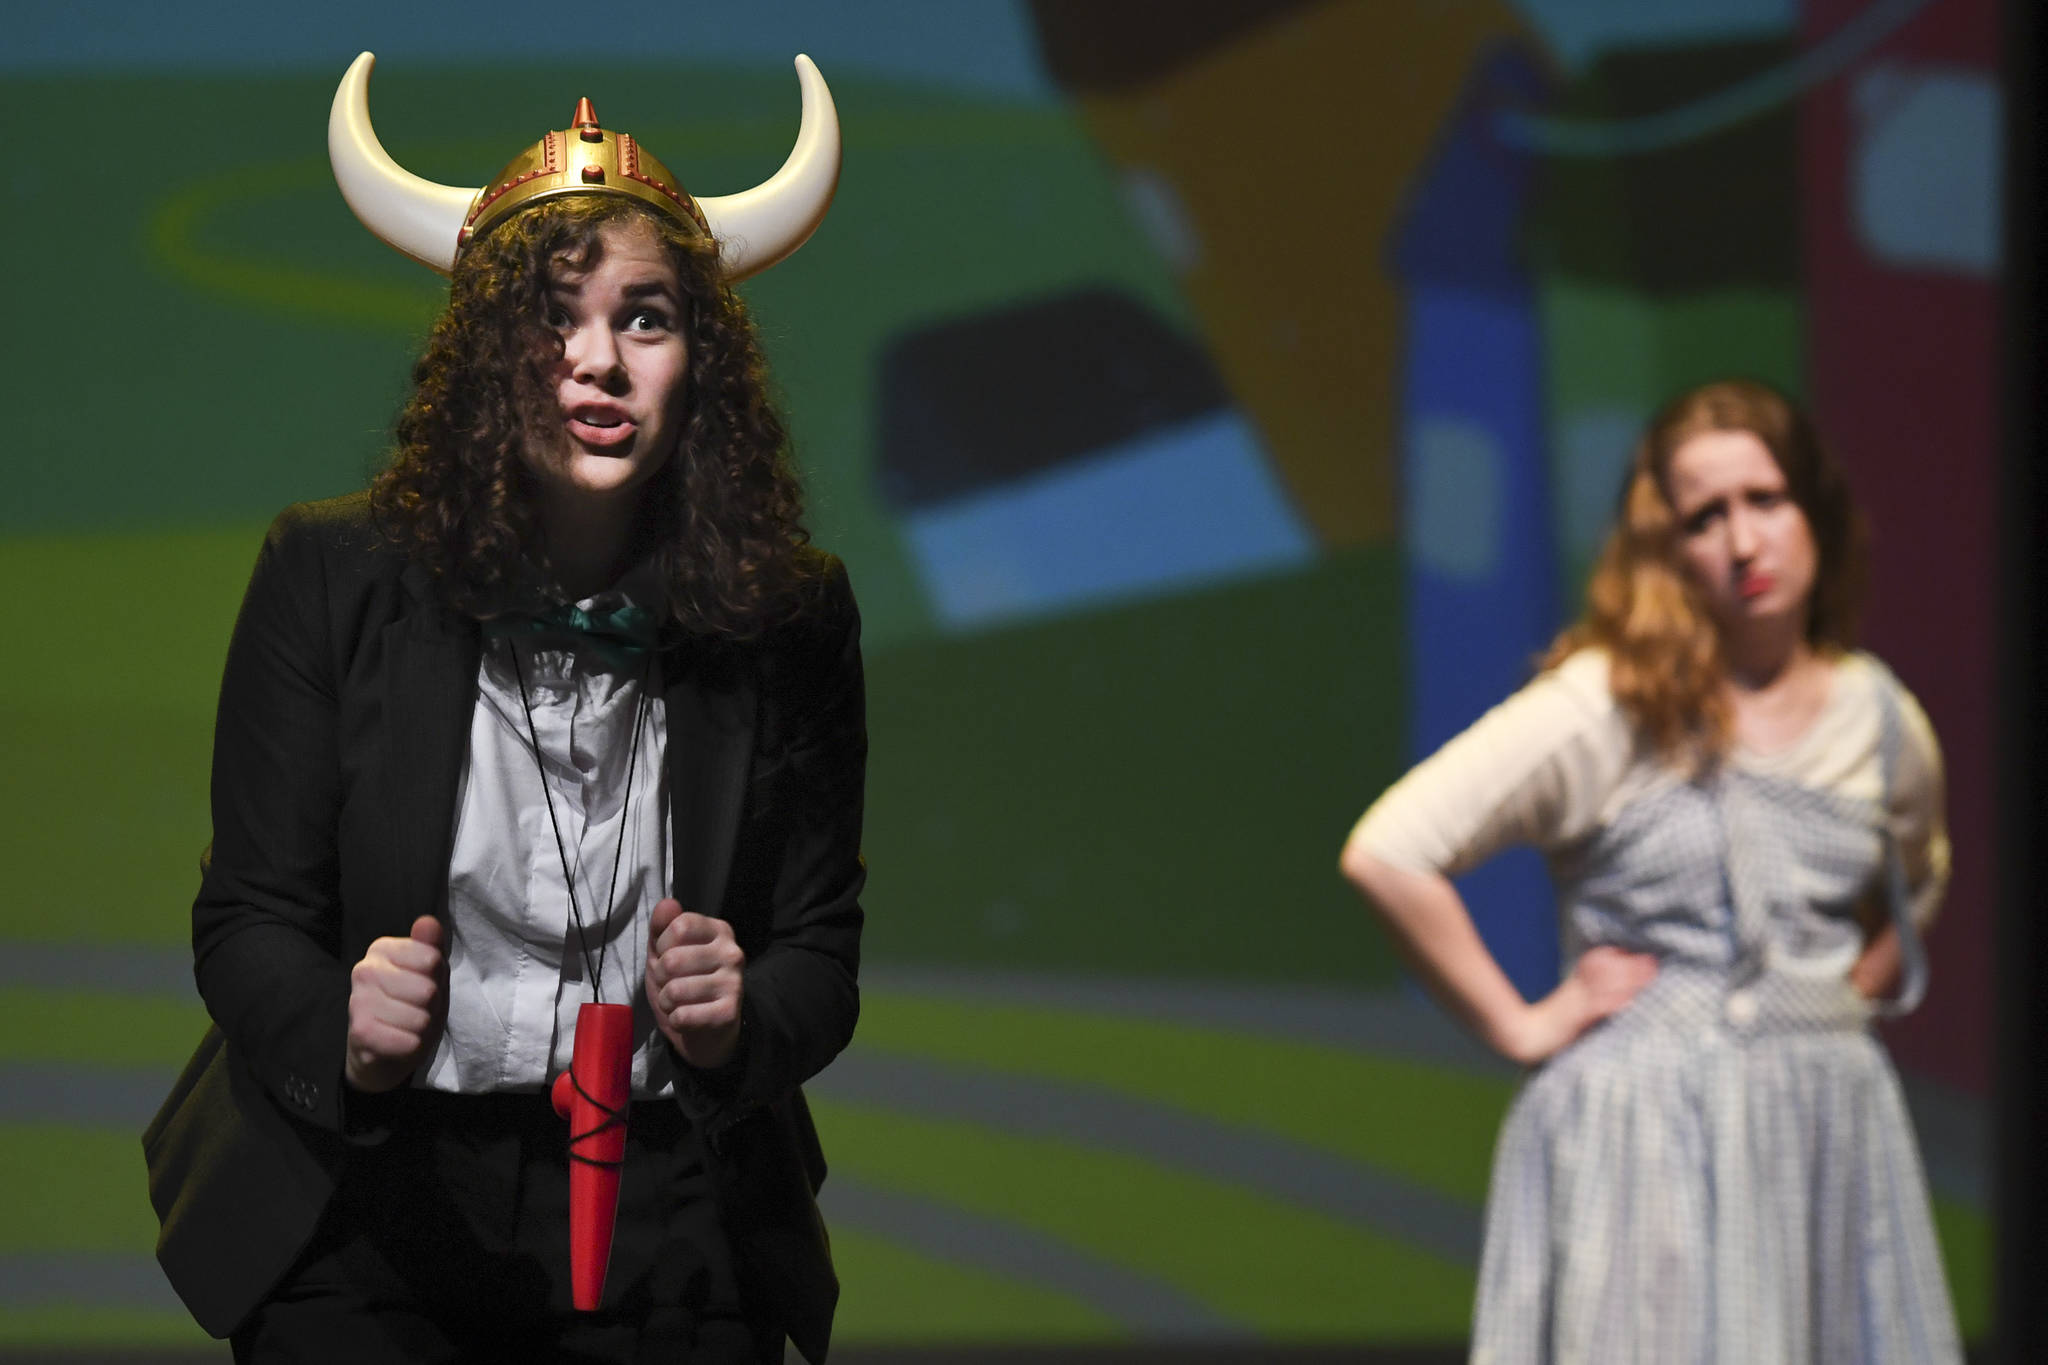 Narrator Nigel Dee, played by Dorothy Kuterbach, left, and Dorothy Gale, played by Devin Moorehead, during rehearsal for the Thunder Mountain High School production of “Choose Your Own Oz” at TMHS on Friday, Nov. 8, 2019. (Michael Penn | Juneau Empire)                                Narrator Nigel Dee, played by Dorothy Kuterbach, left, and Dorothy Gale, played by Devin Moorehead, during rehearsal for the Thunder Mountain High School production of “Choose Your Own Oz” at TMHS on Friday, Nov. 8, 2019. (Michael Penn | Juneau Empire)